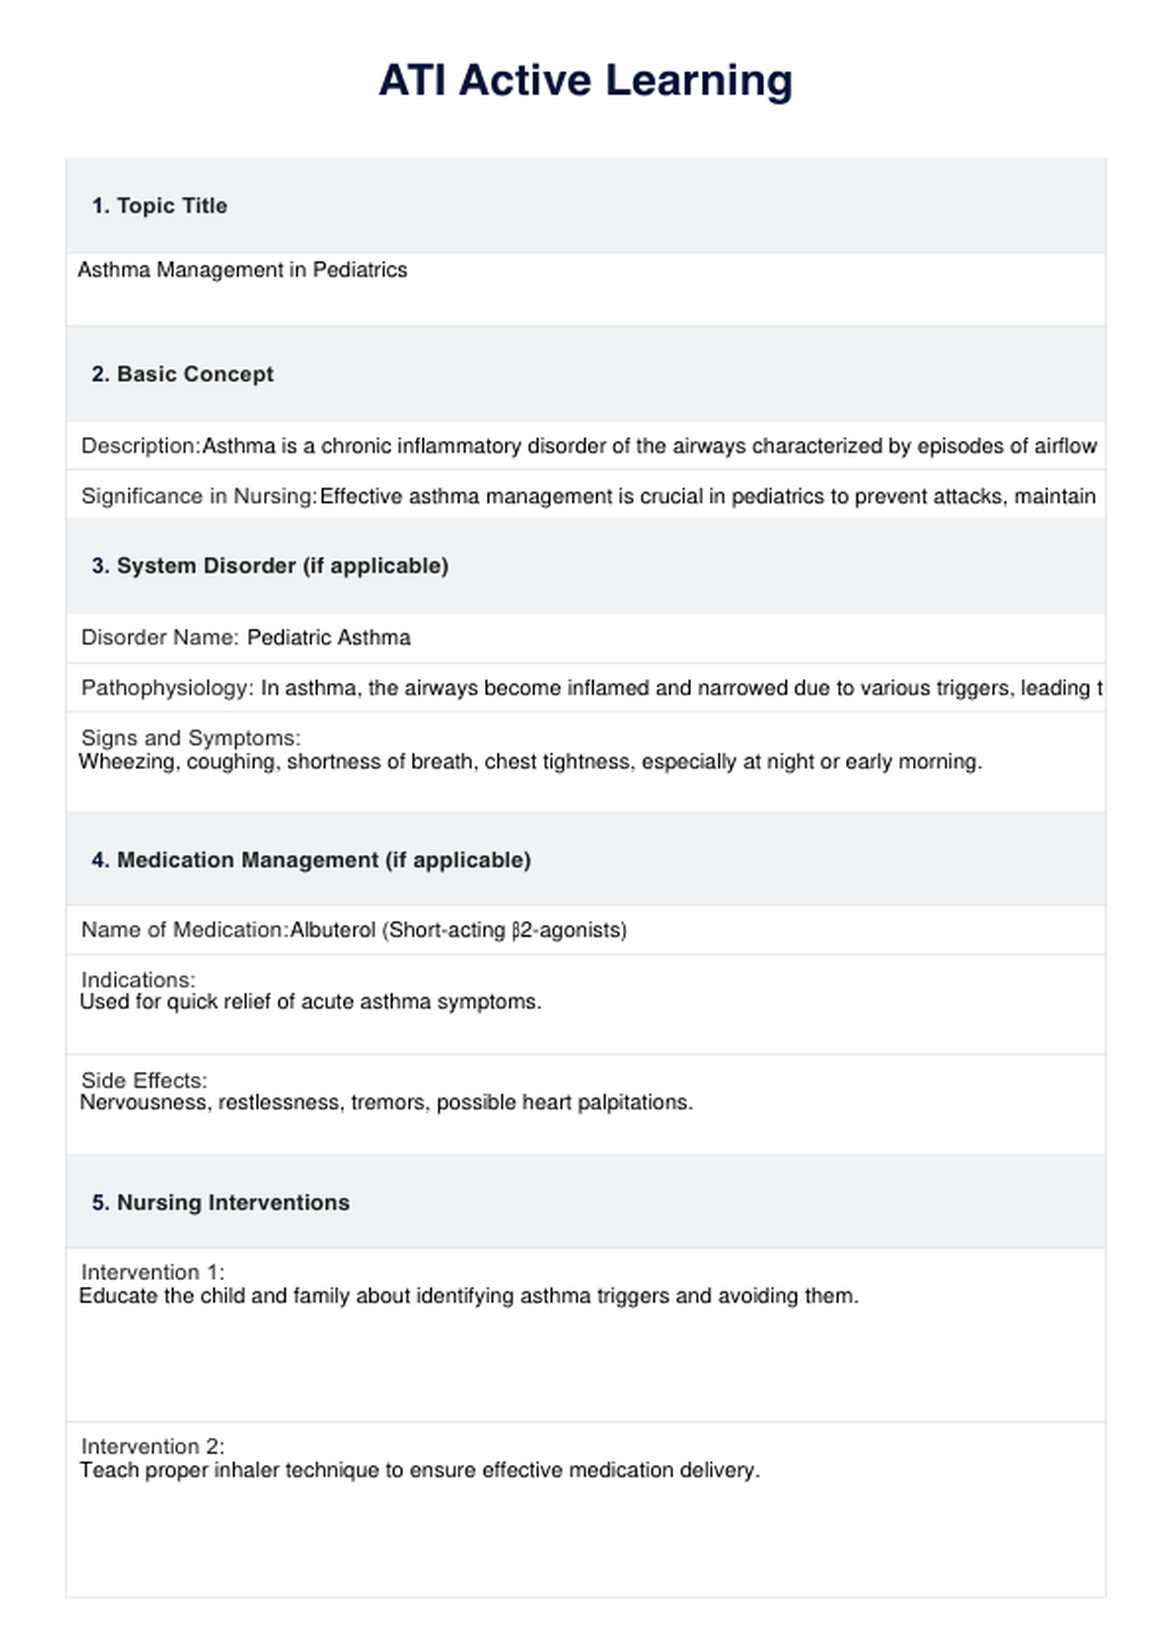 ATI Active Learning Template PDF Example